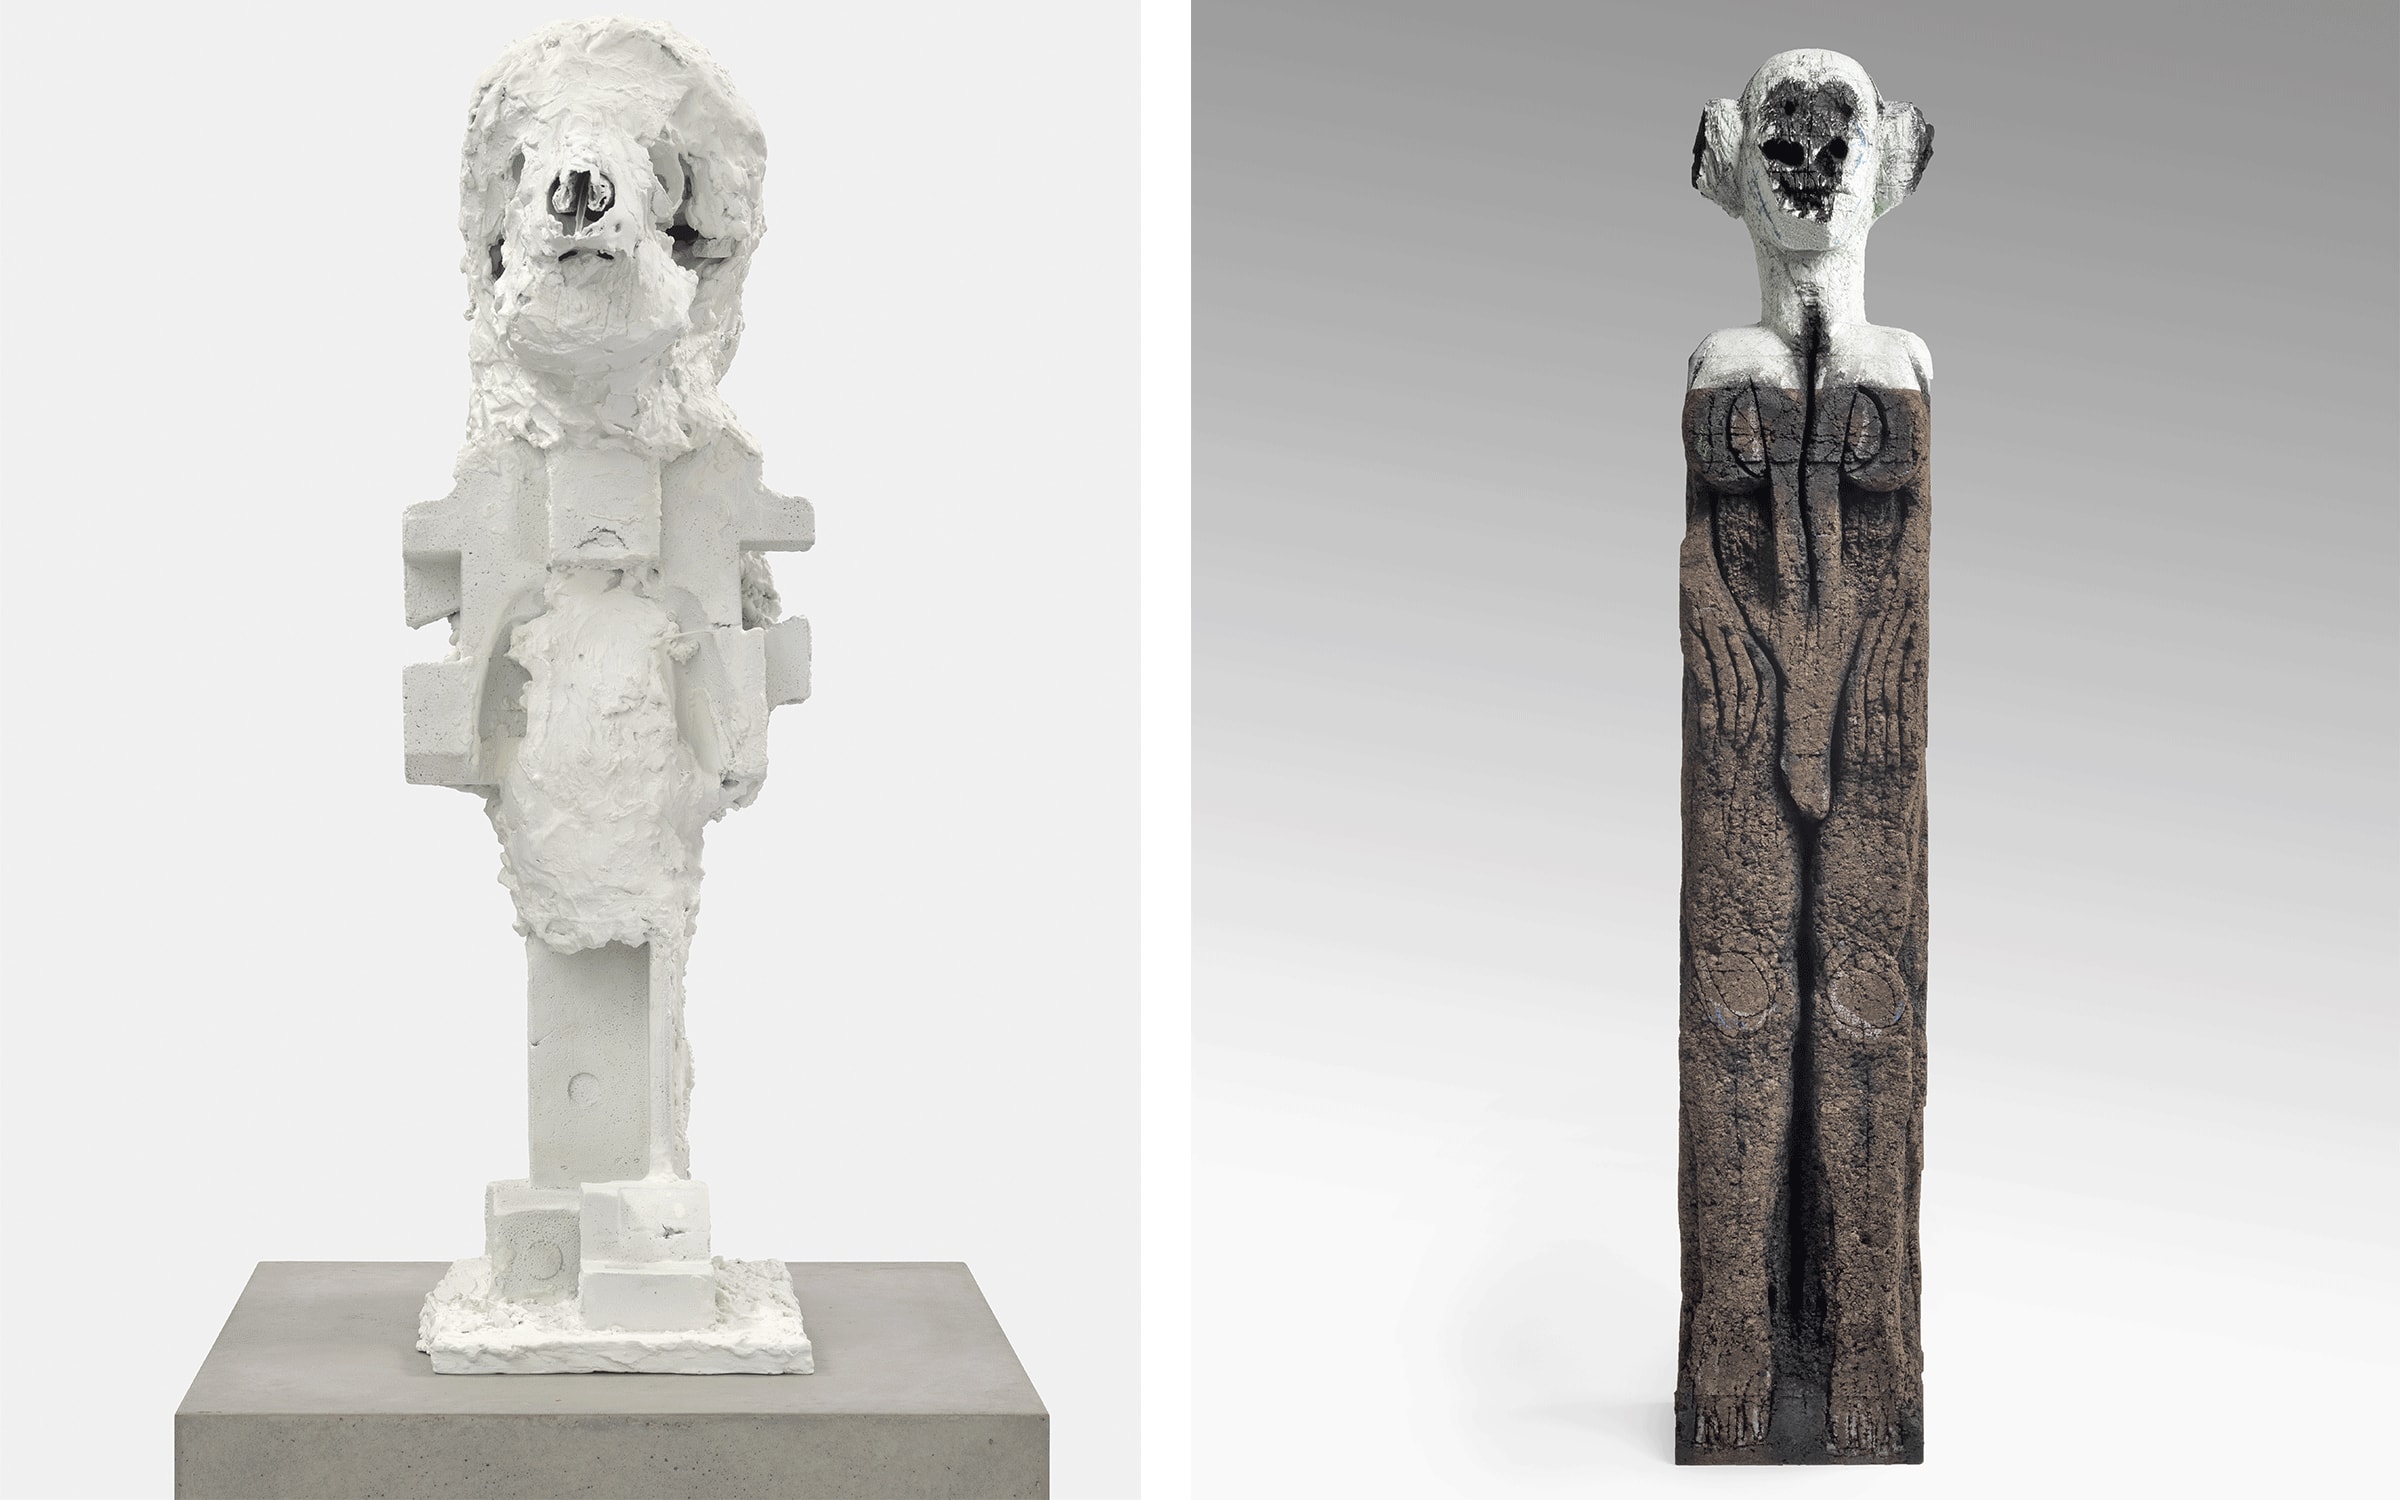 Artworks by Huma Bhabha. Left: Shadow Gang, 2021. Courtesy of the artist and Xavier Hufkens, Brussels. Photograph by Dan Bradica. Right: What is Love, 2013. David and Indrė Roberts Collection.